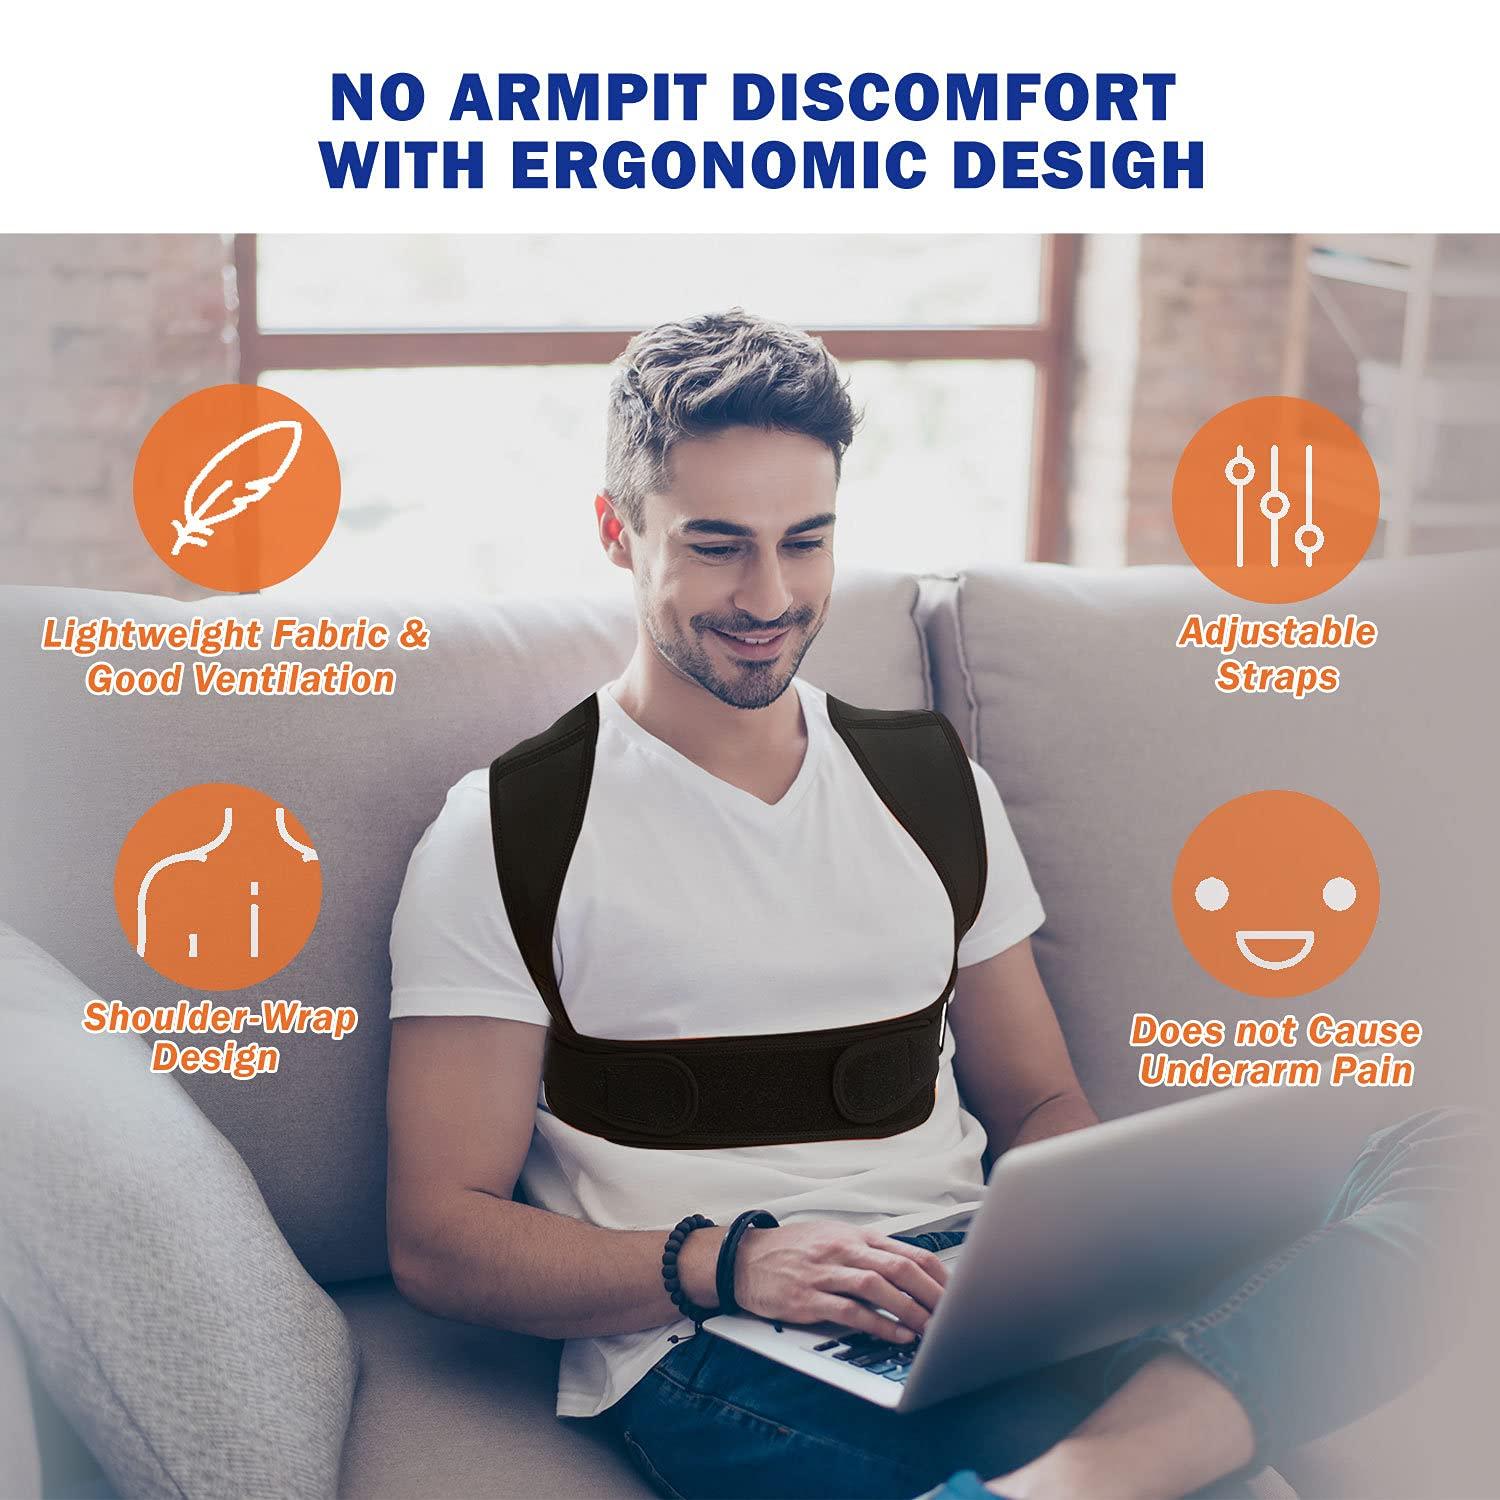 Posture Corrector for Women and Men, Huninpr Adjustable Upper Back Brace,  Breathable Back Support straightener, Providing Pain Relief from Lumbar,  Neck, Shoulder, and Clavicle, Back. (Universal size)